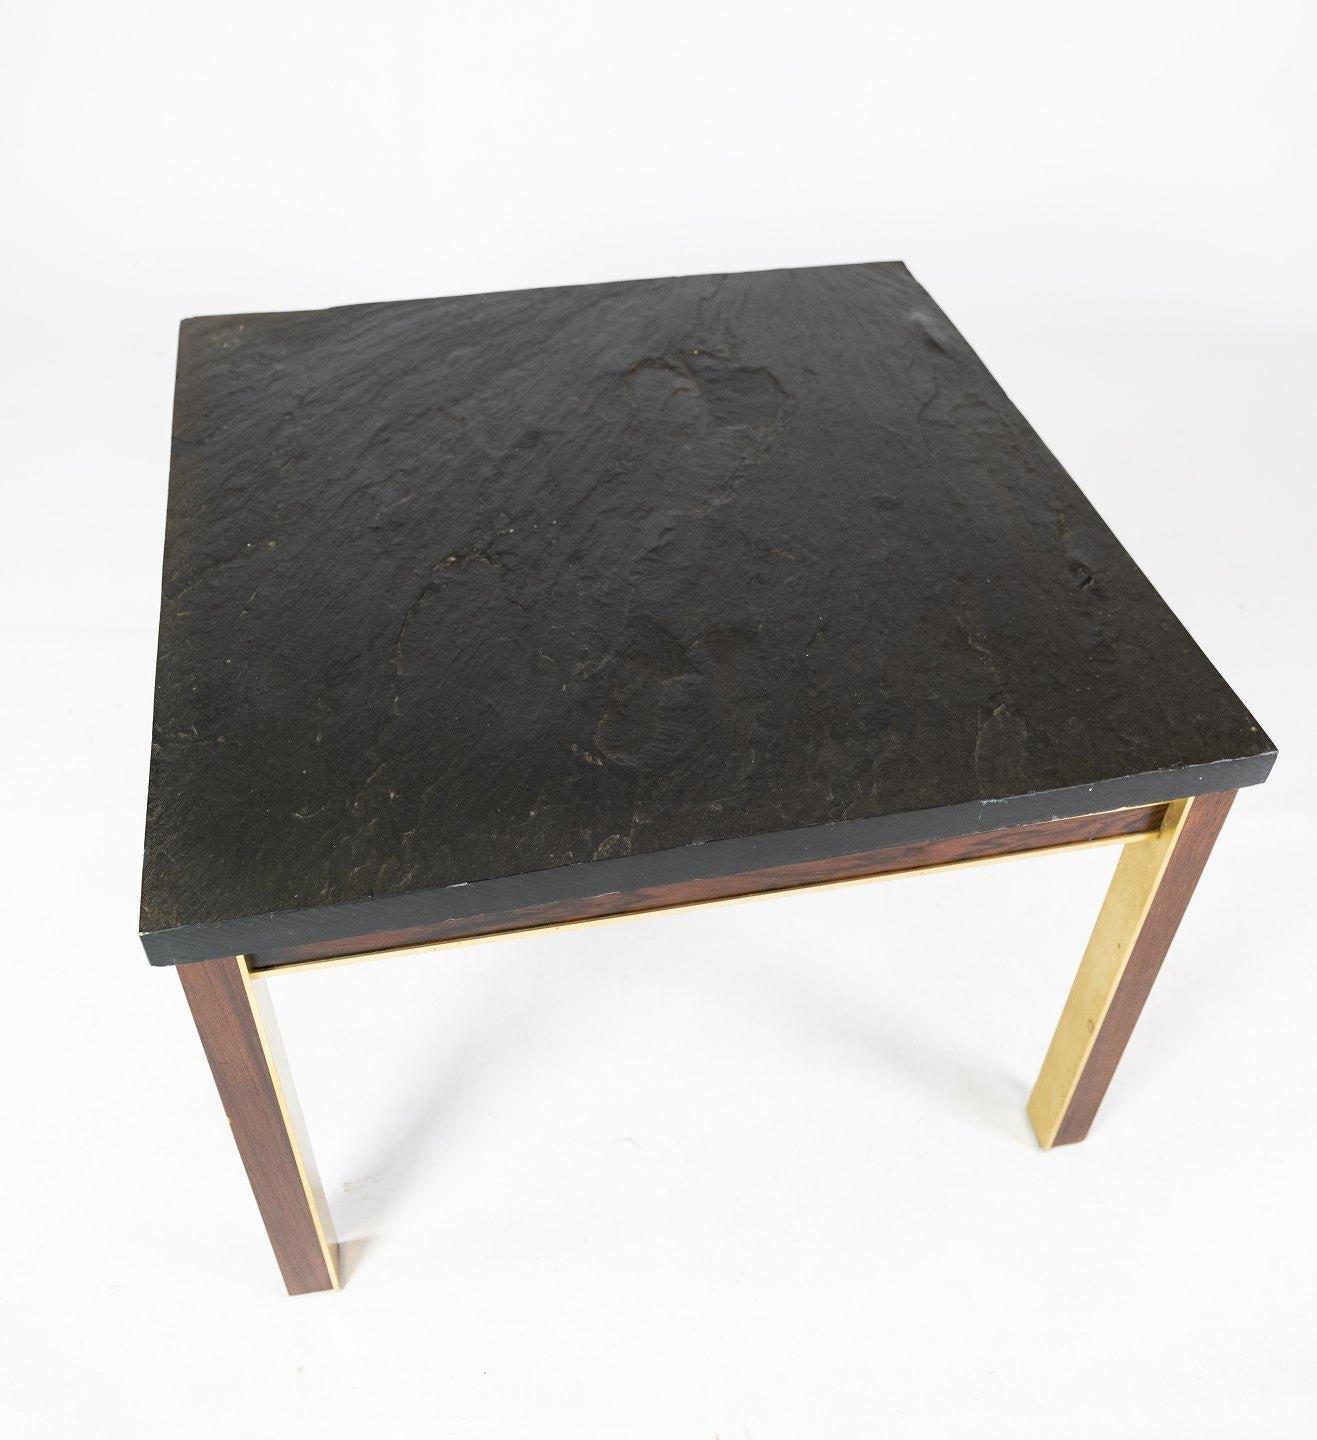 Coffee table with slate plate, frame of gilded metal and rosewood by Bendixen Design from the 1970s. The table is in great used condition.
  